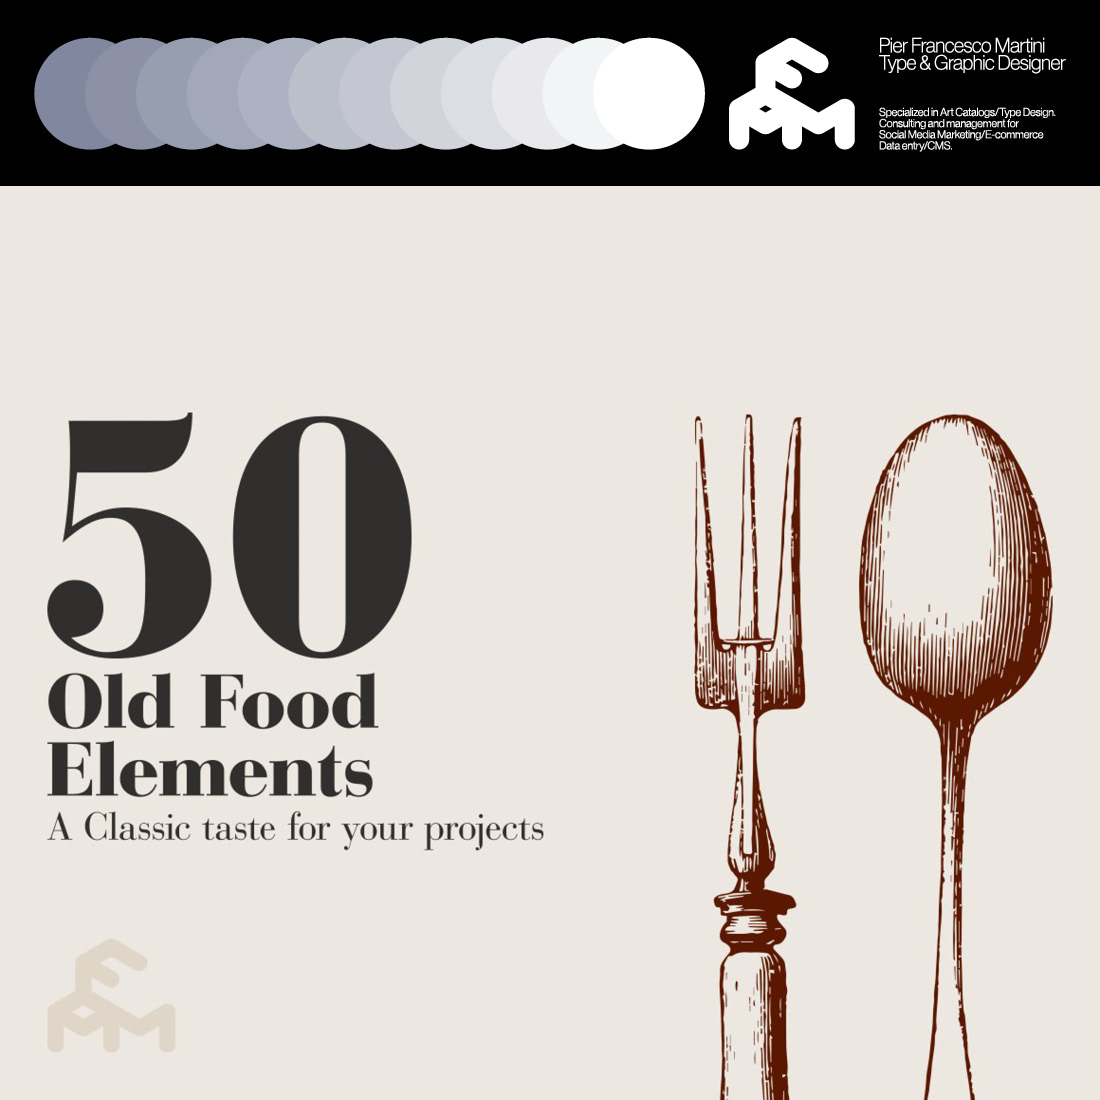 50 Old Food Elements cover image.